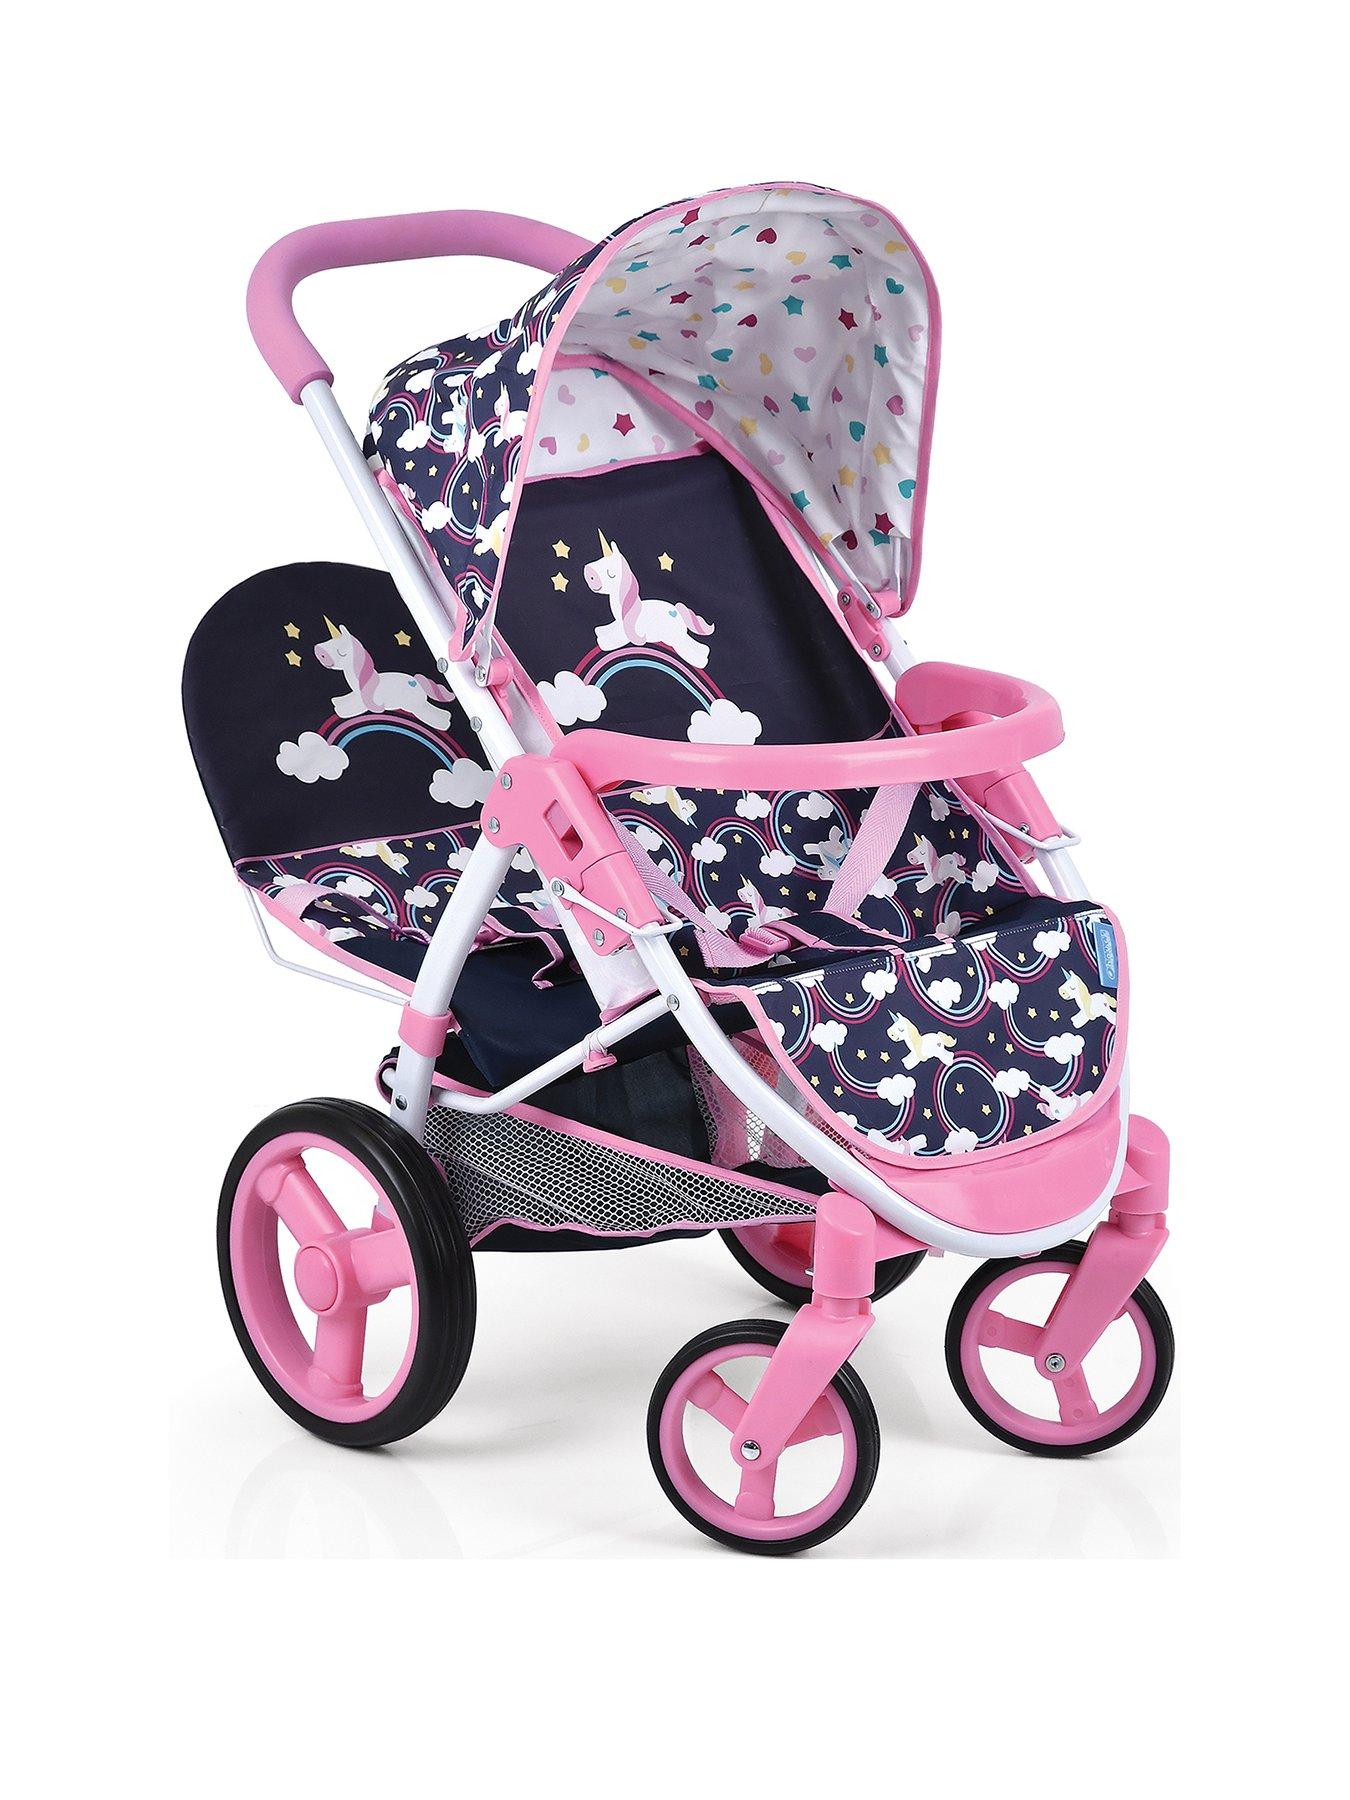 children's play double buggy